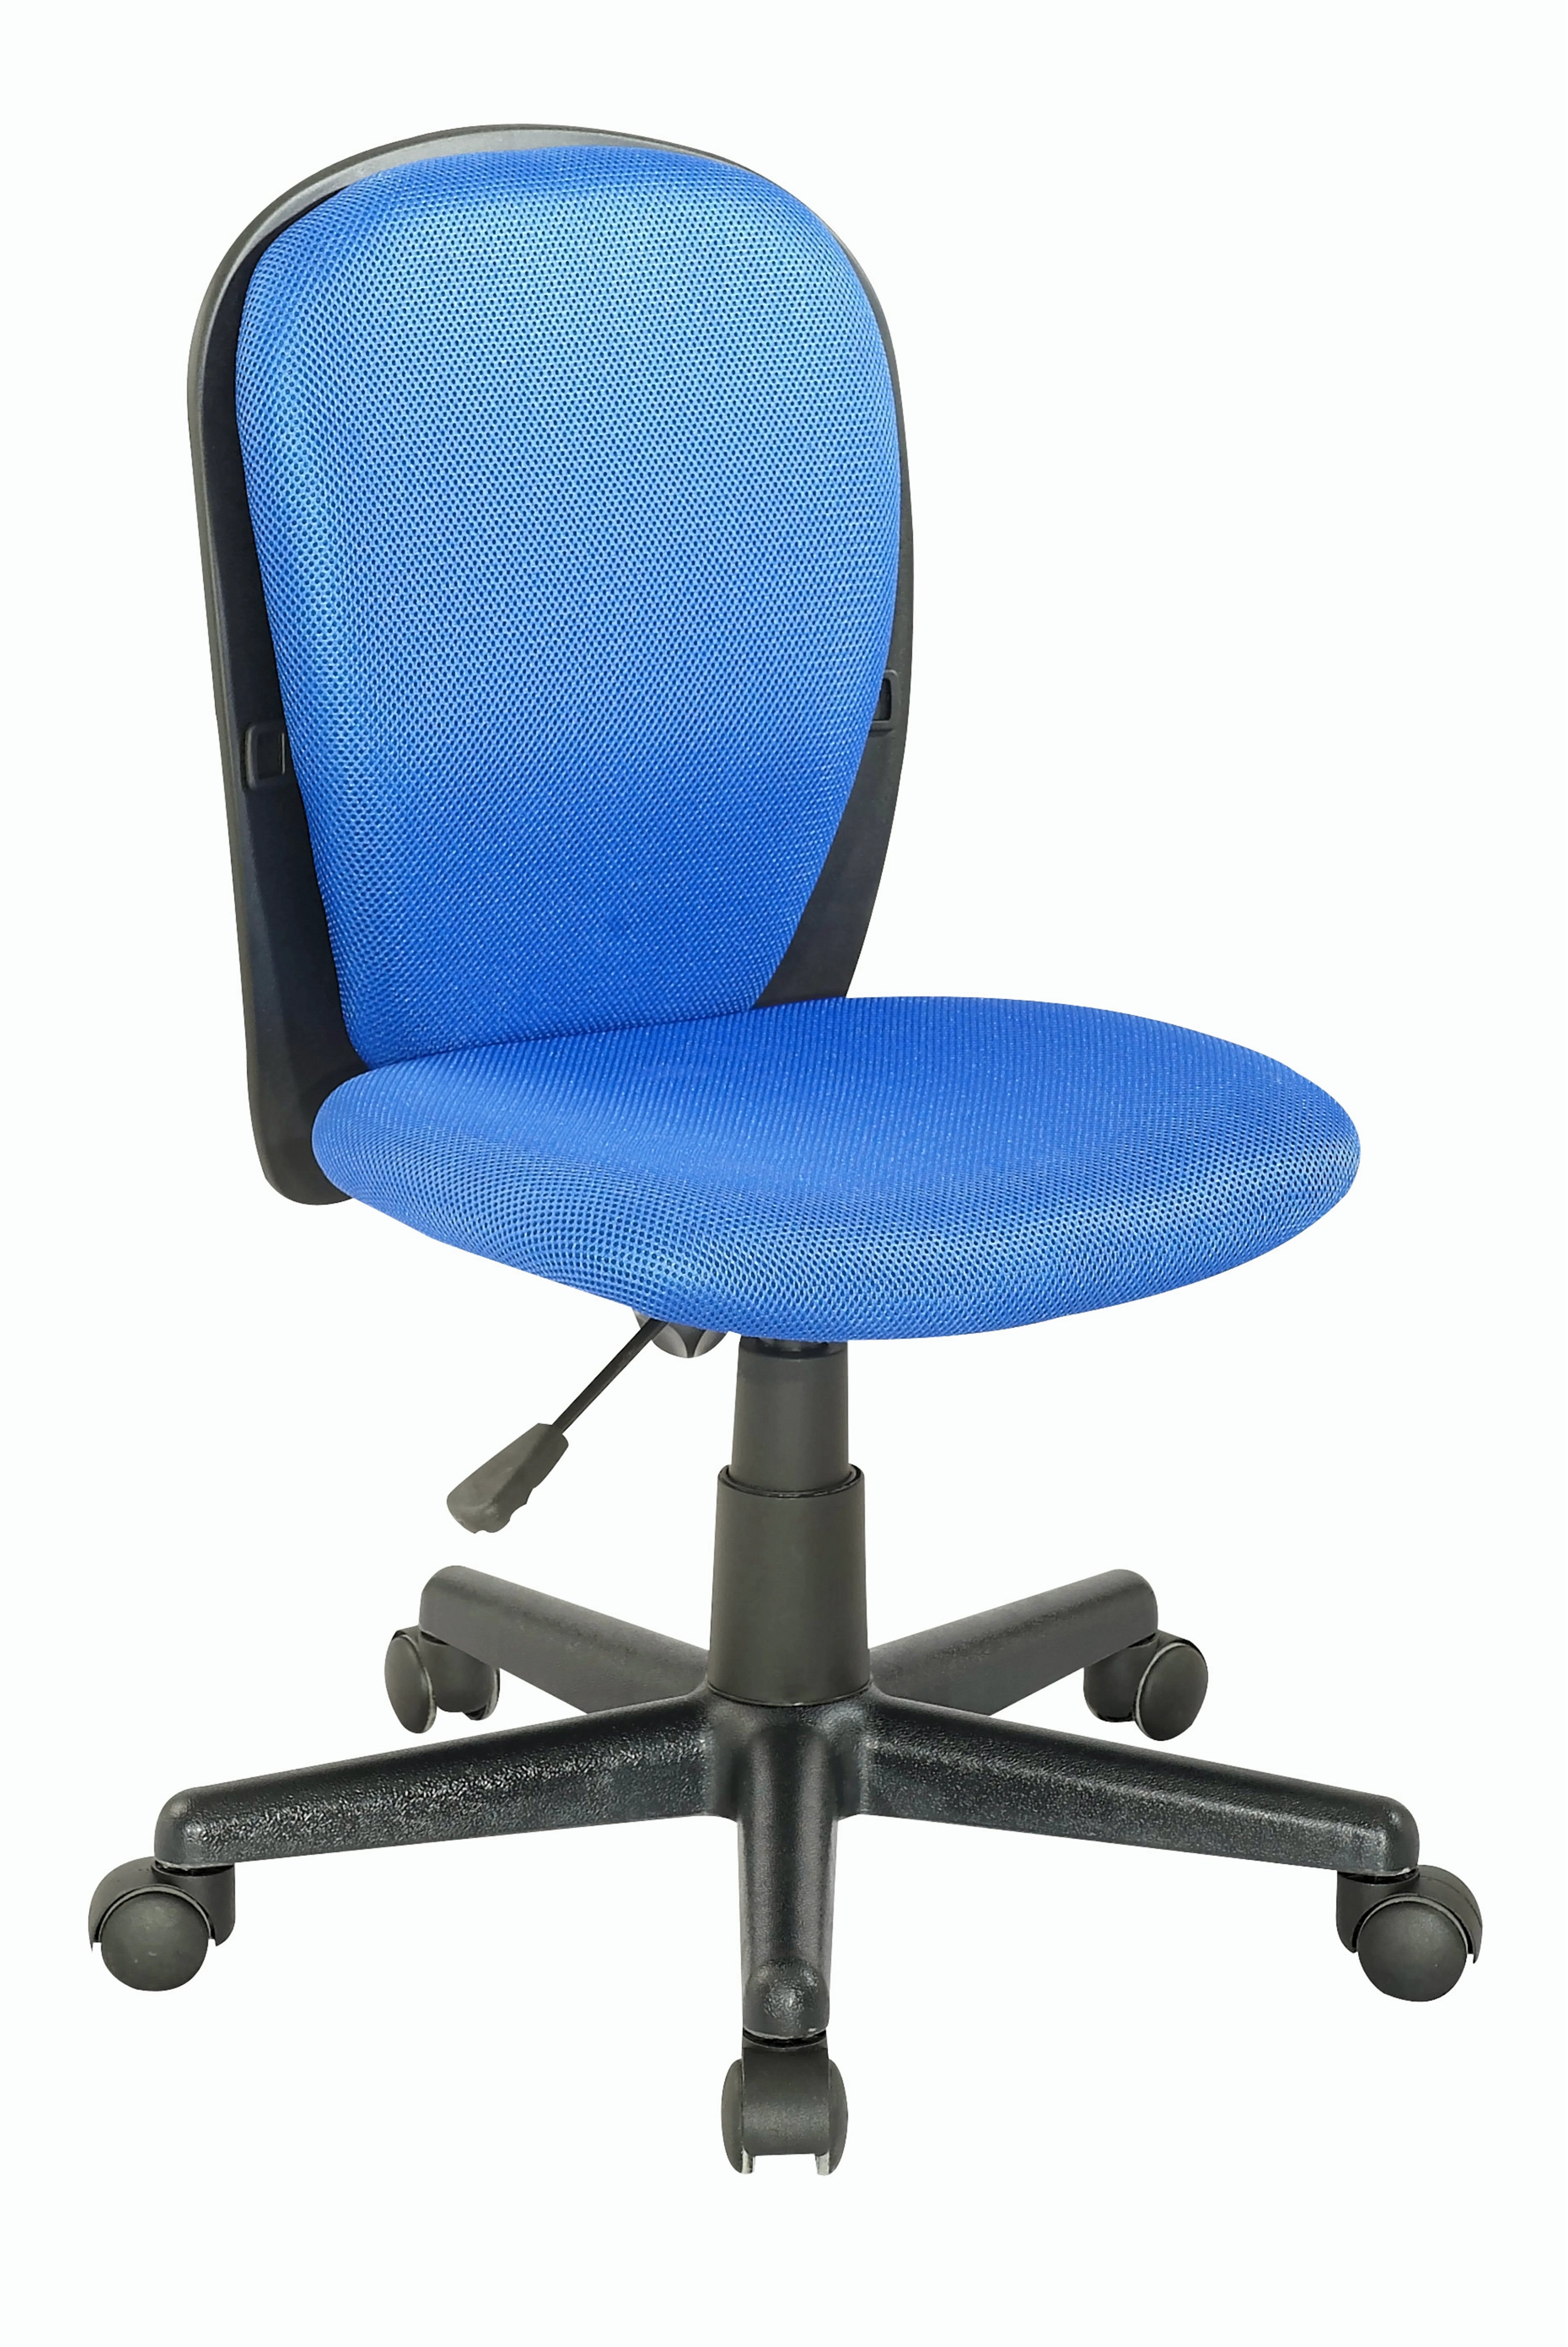 Chintaly 4245-cch-blu Fabric Back And Seat Youth Desk Chair